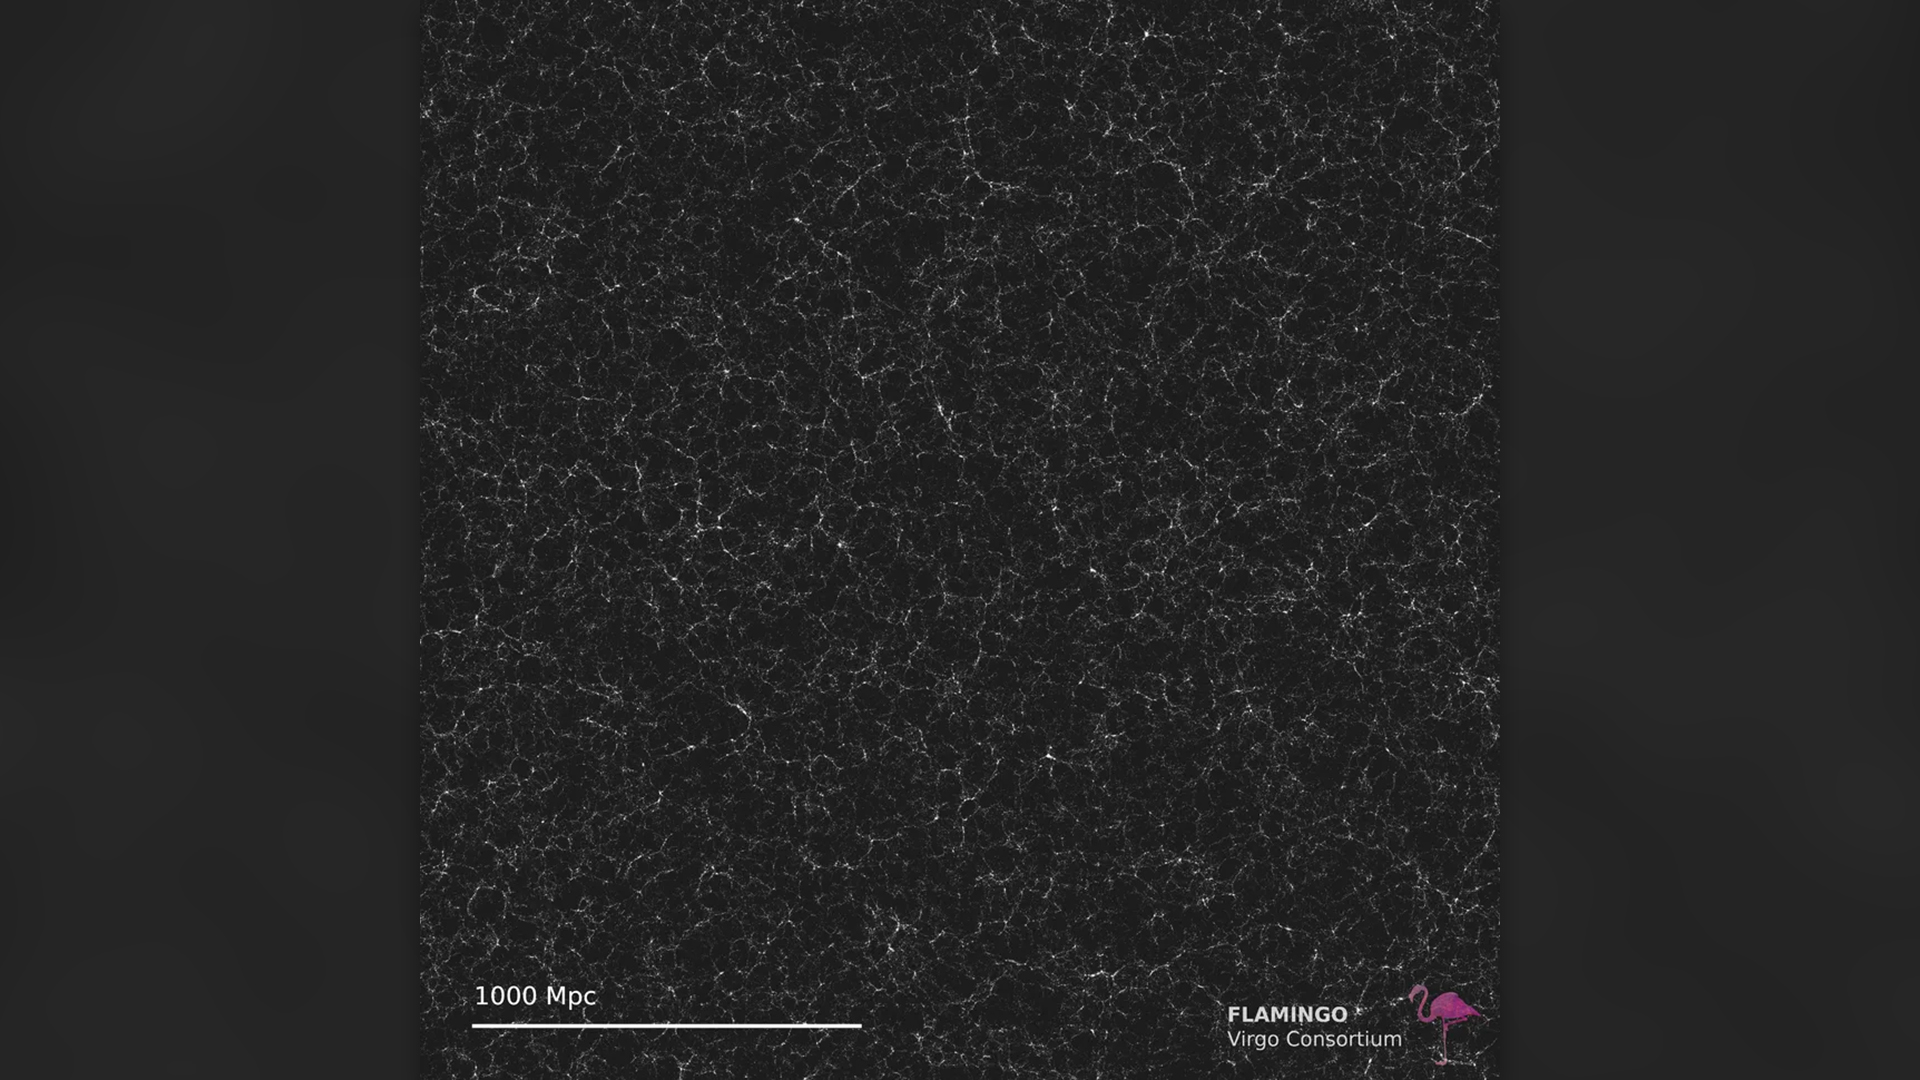 Gpc box showing quantity of stars (stellar surface density) in a logarithmic color scale to visualise faint structures.